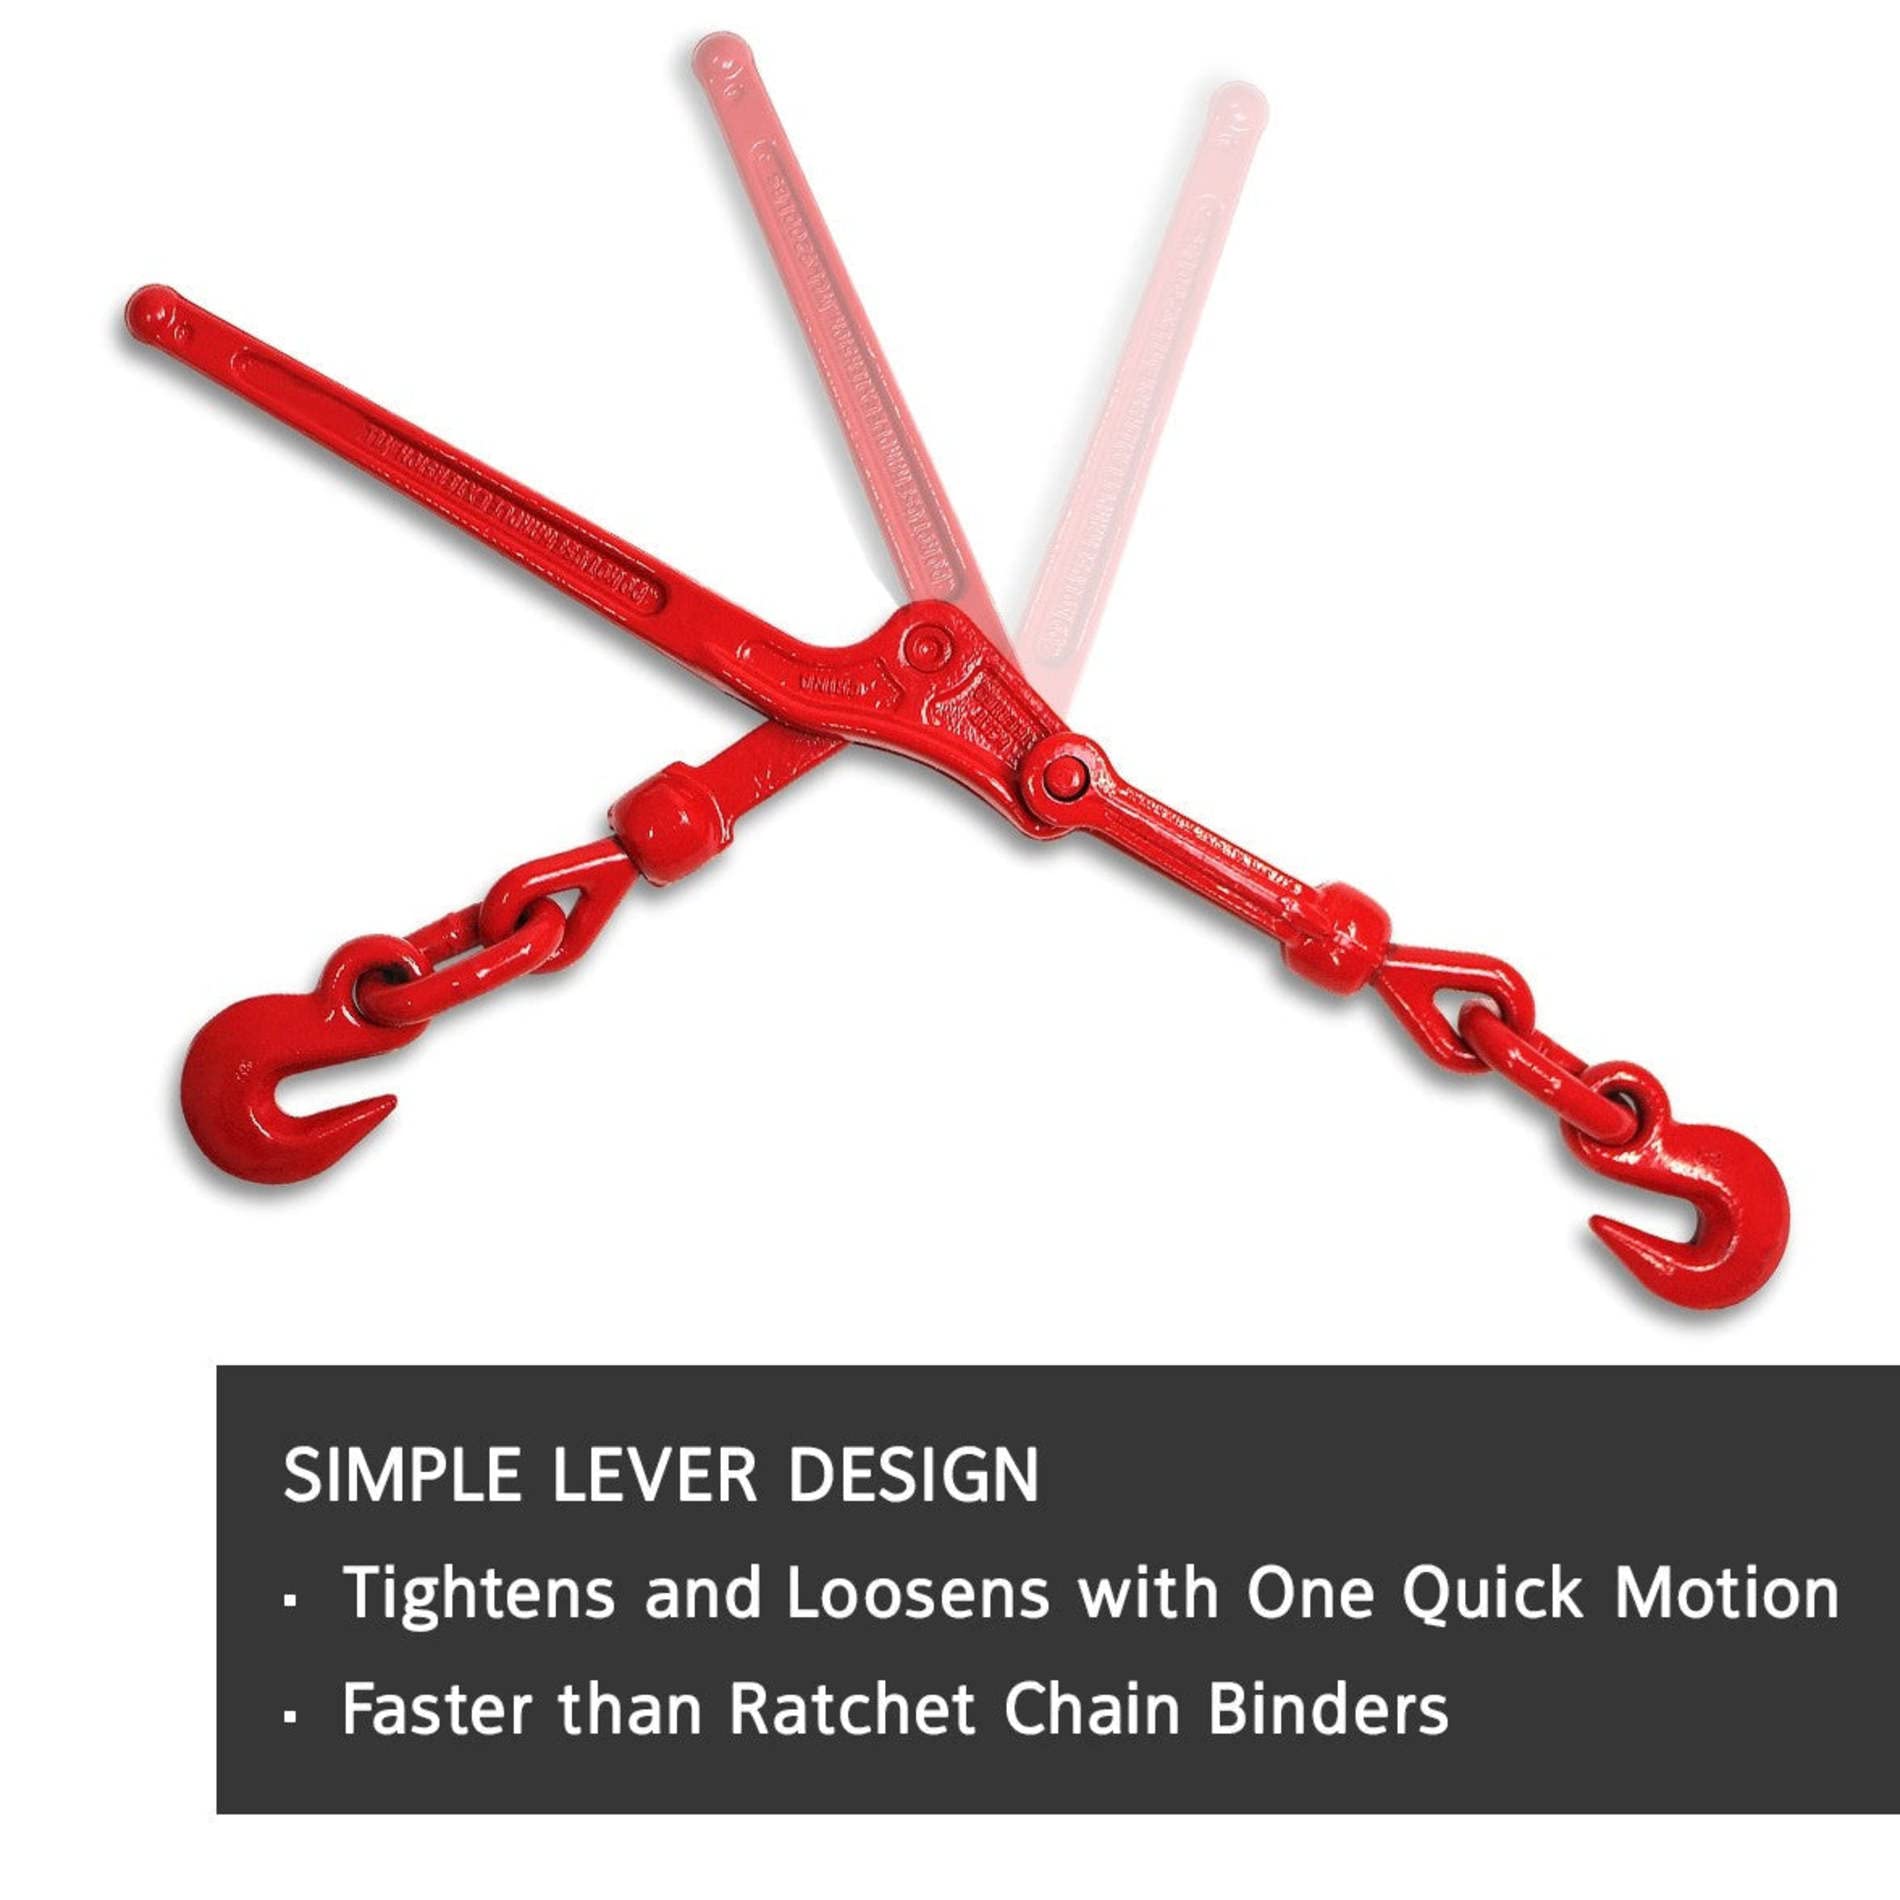 DC Cargo Chain Binder Kit (2 Sets) | 5/16" Grade 70 Extra Long 20 Foot Chain - and Load Binder Set | Heavy Duty Ratcheting Chain and Binder | Load Chain and Binders – 4,700lb Working Load Limit As Set